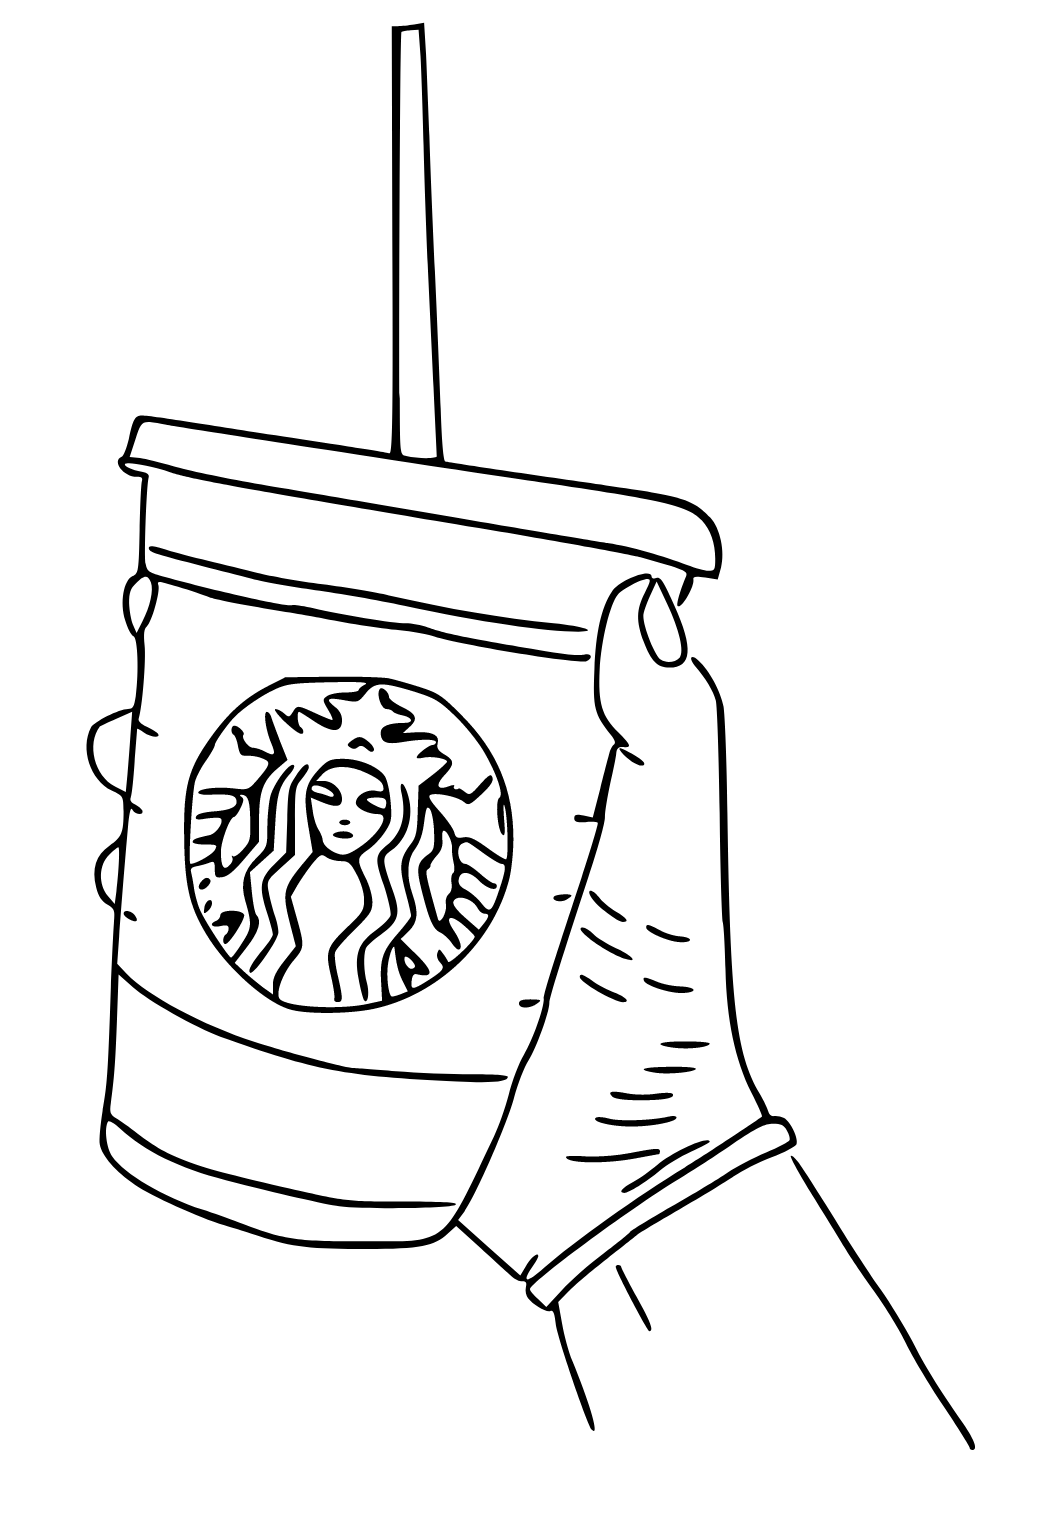 starbucks cup coloring page